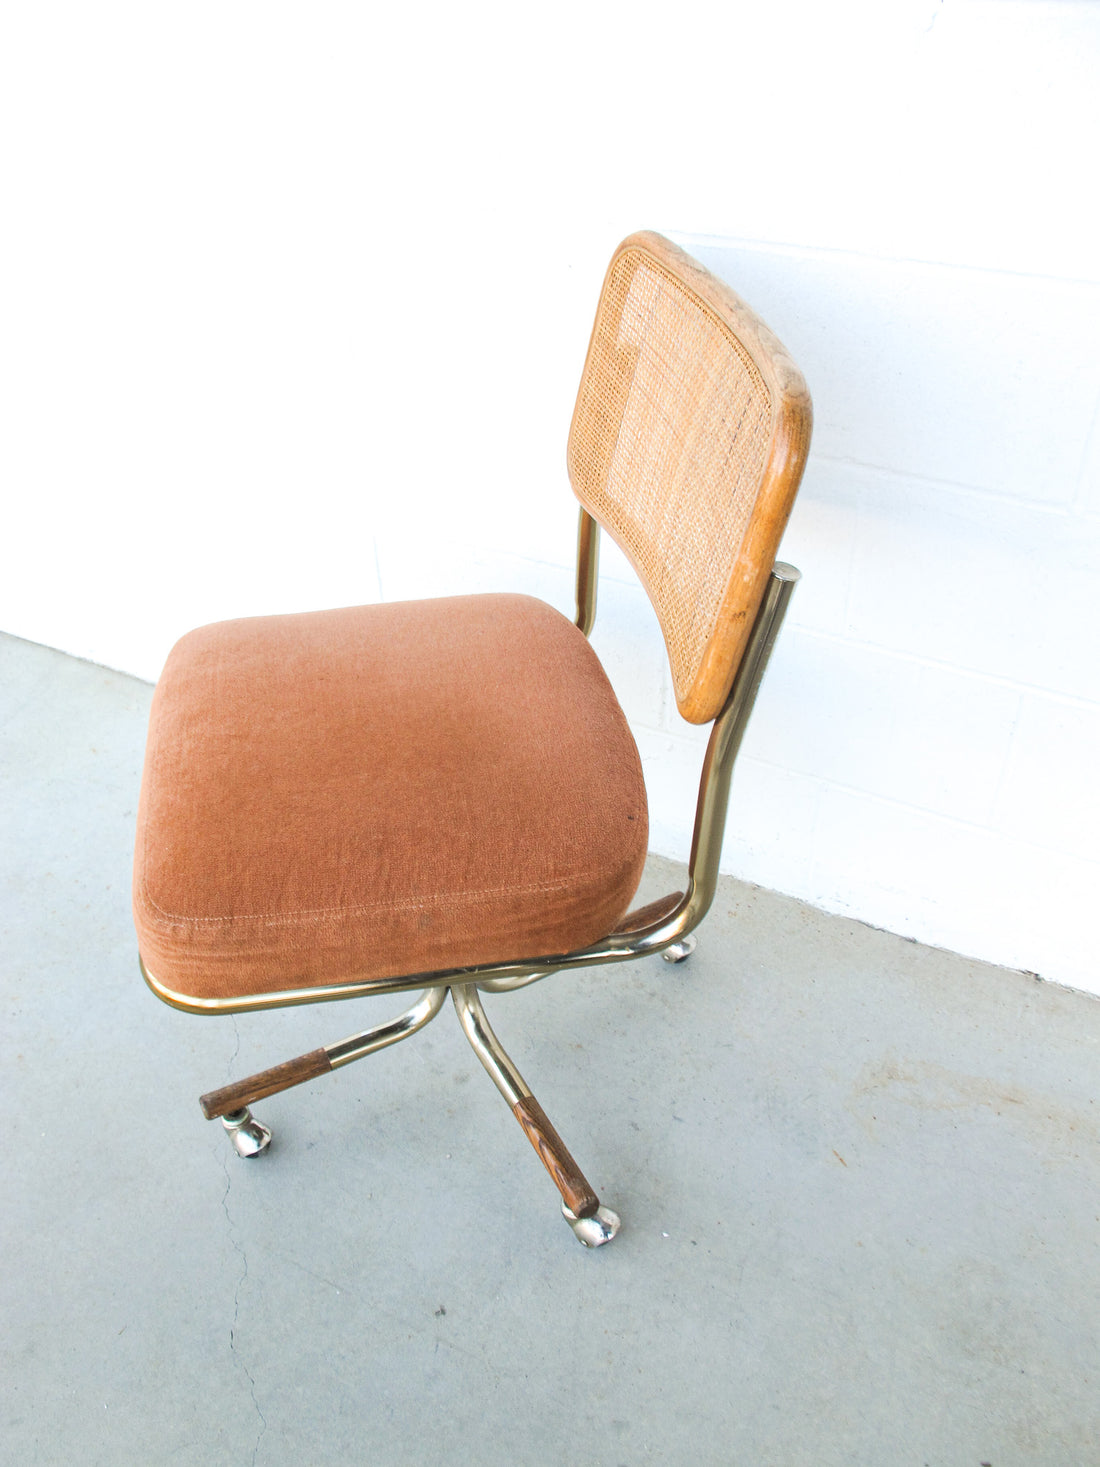 Vintage Marcel Breuer Style Rolling Cushioned Office Chairs -  (SOLD SEPARATELY)